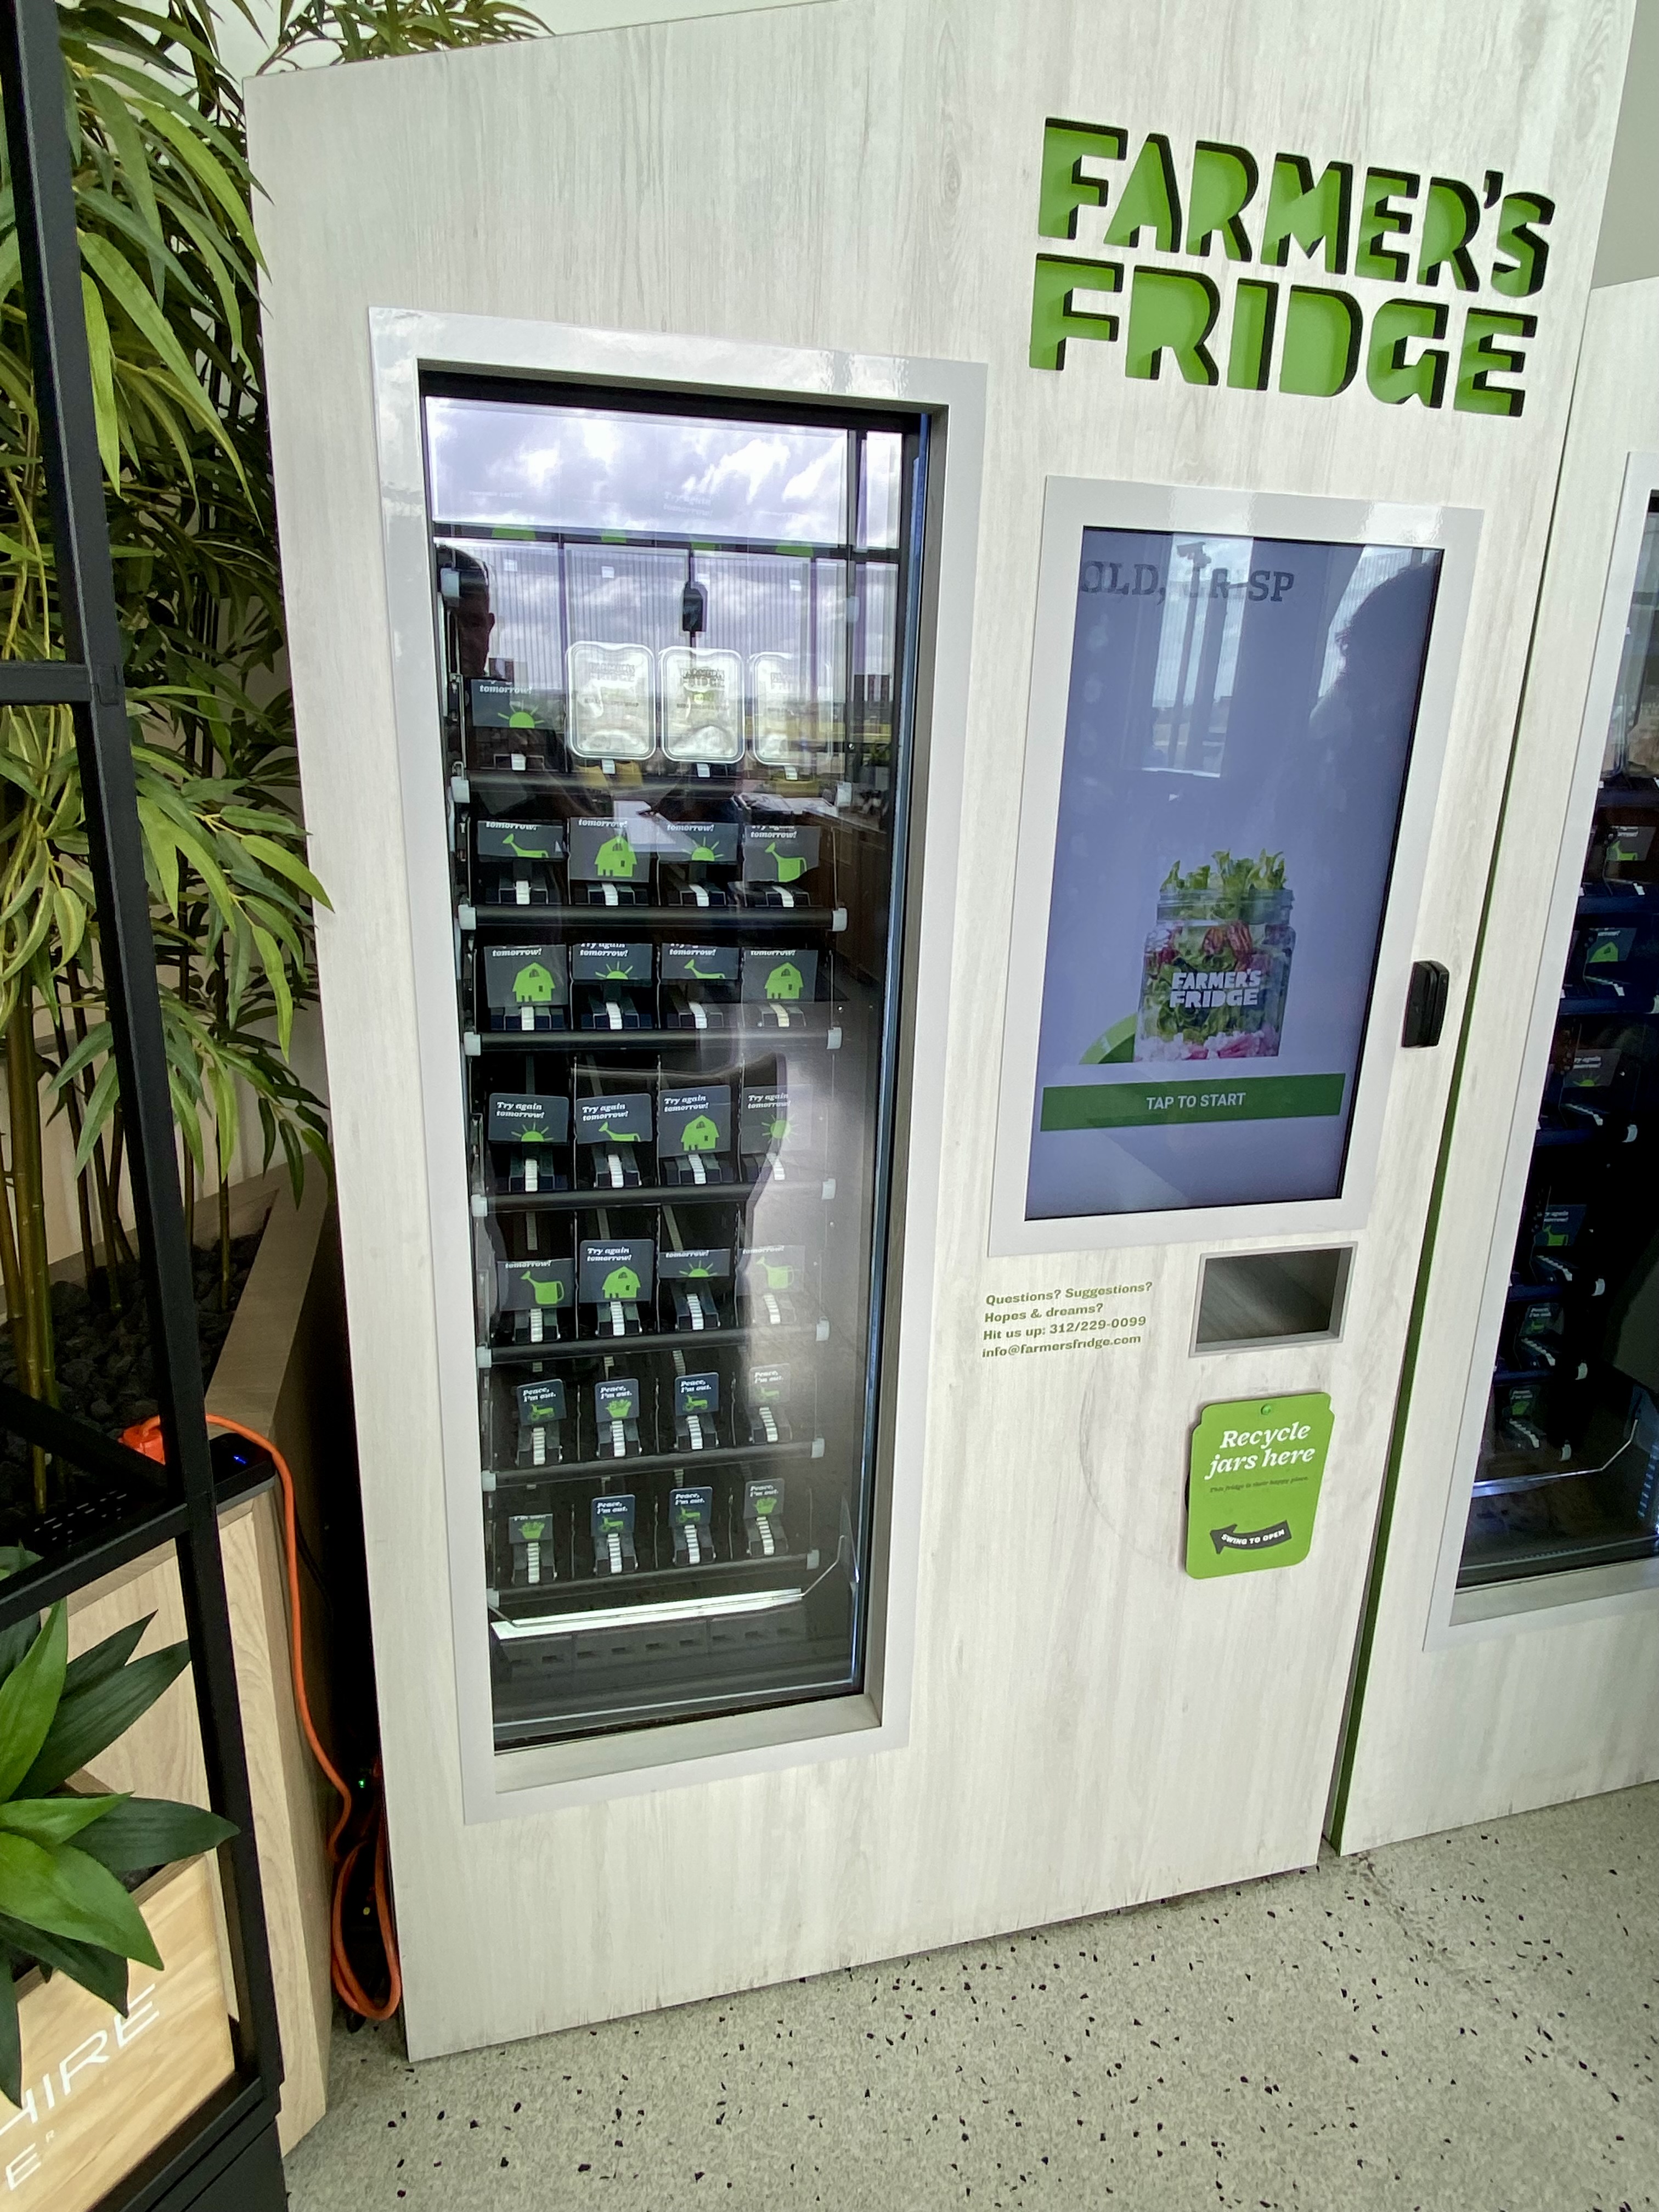 a vending machine with green text